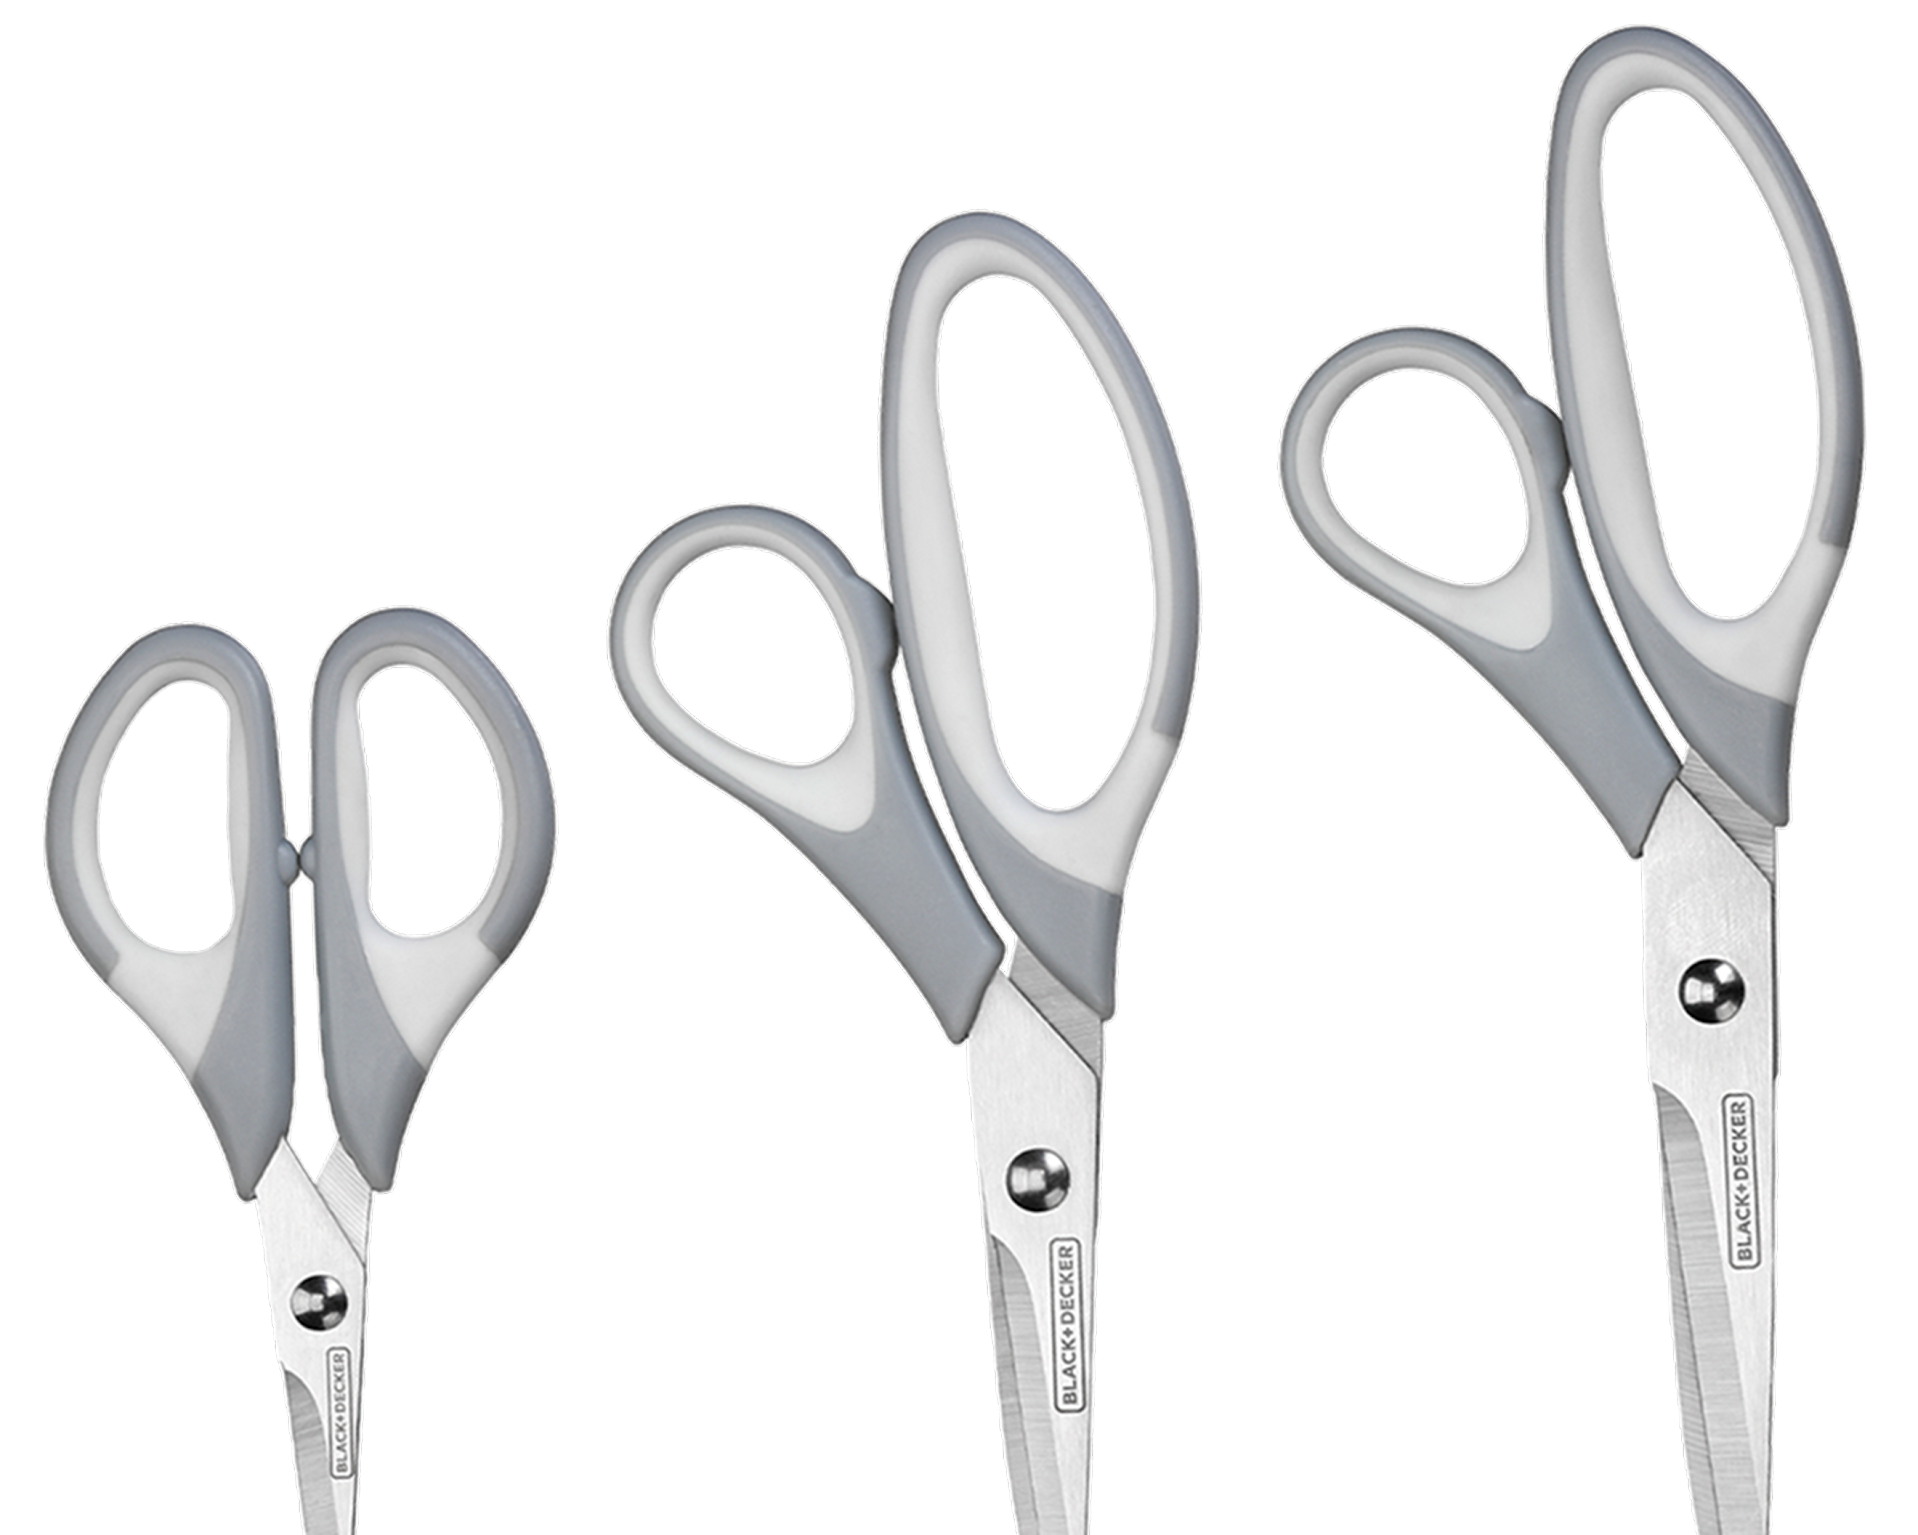 Black and Decker Power Scissors For Sewing Or Crafting? - Thimble